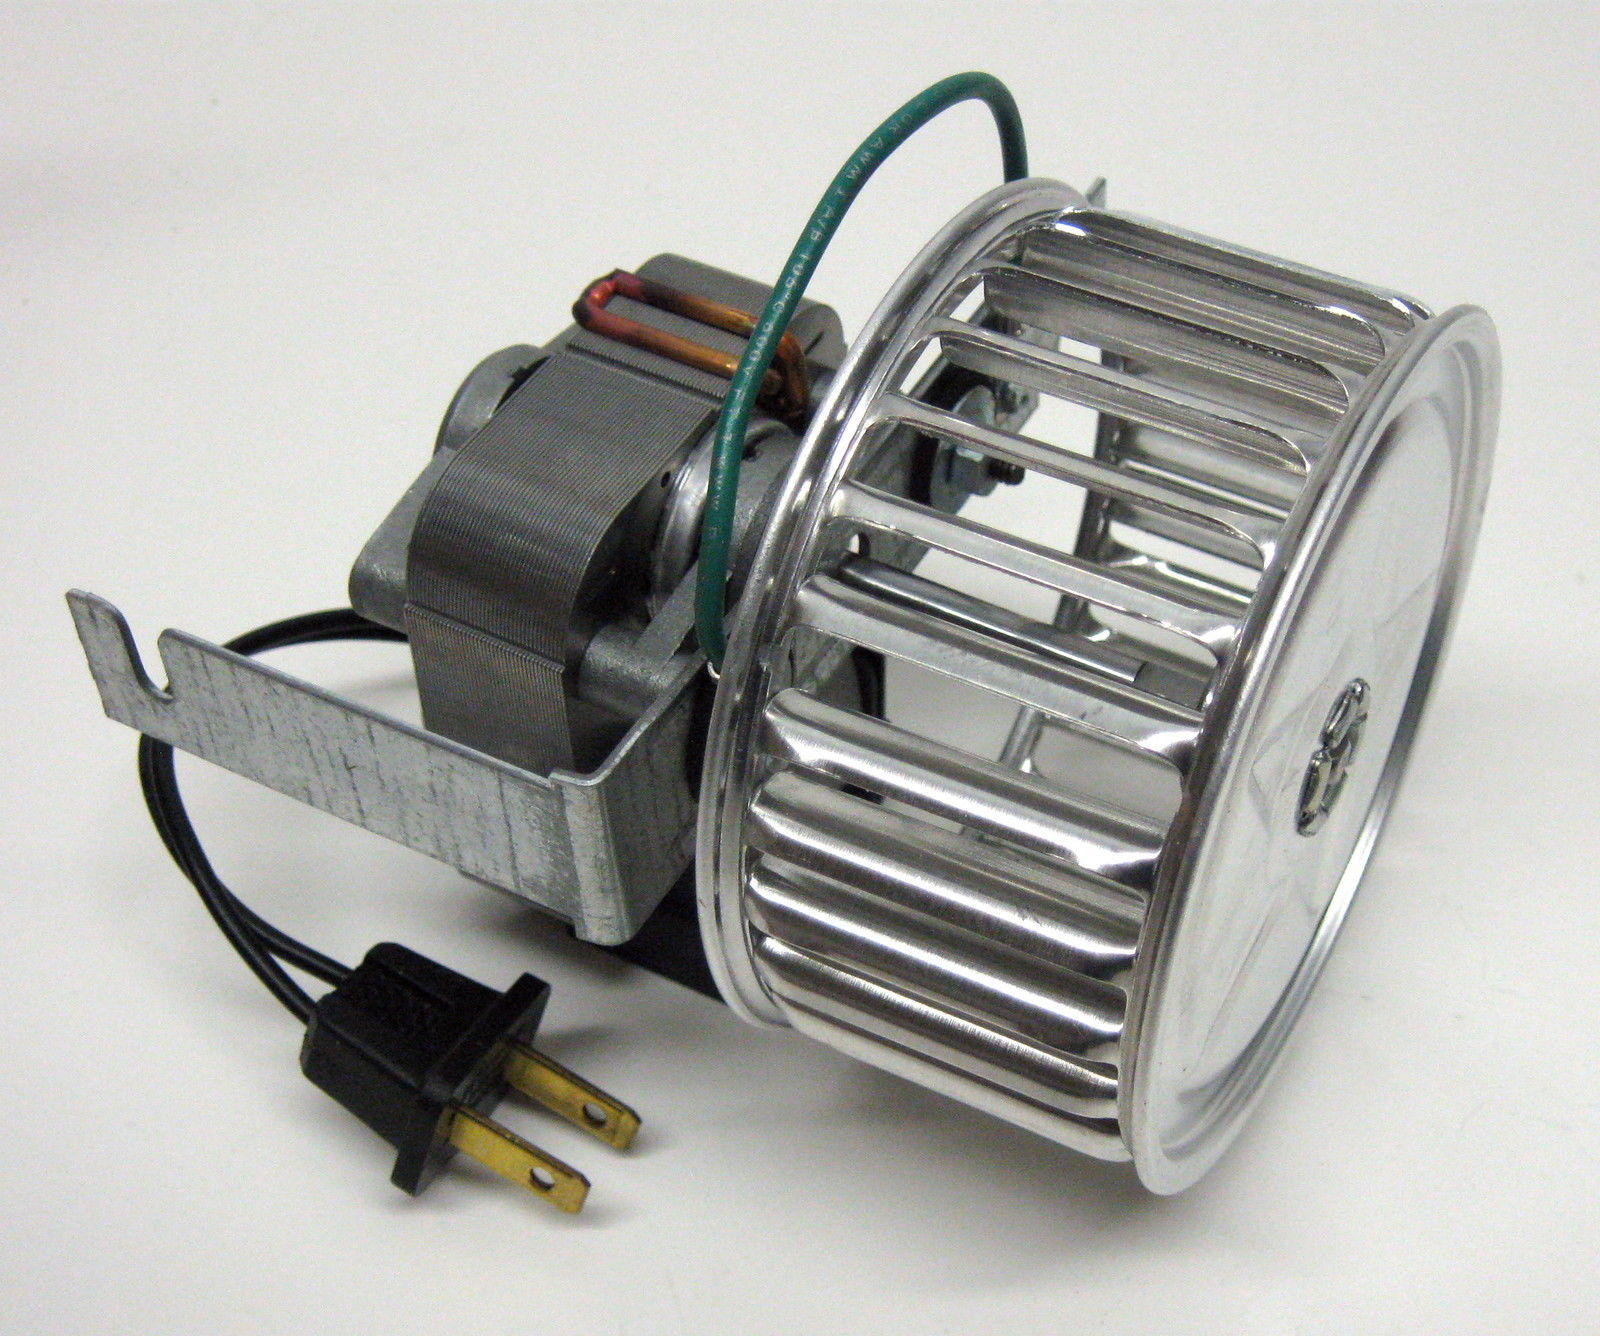 Details About 82229000 Genuine Nutone Broan Oem Vent Bath Fan Motor For Model 9415 C 82230 within sizing 1600 X 1336